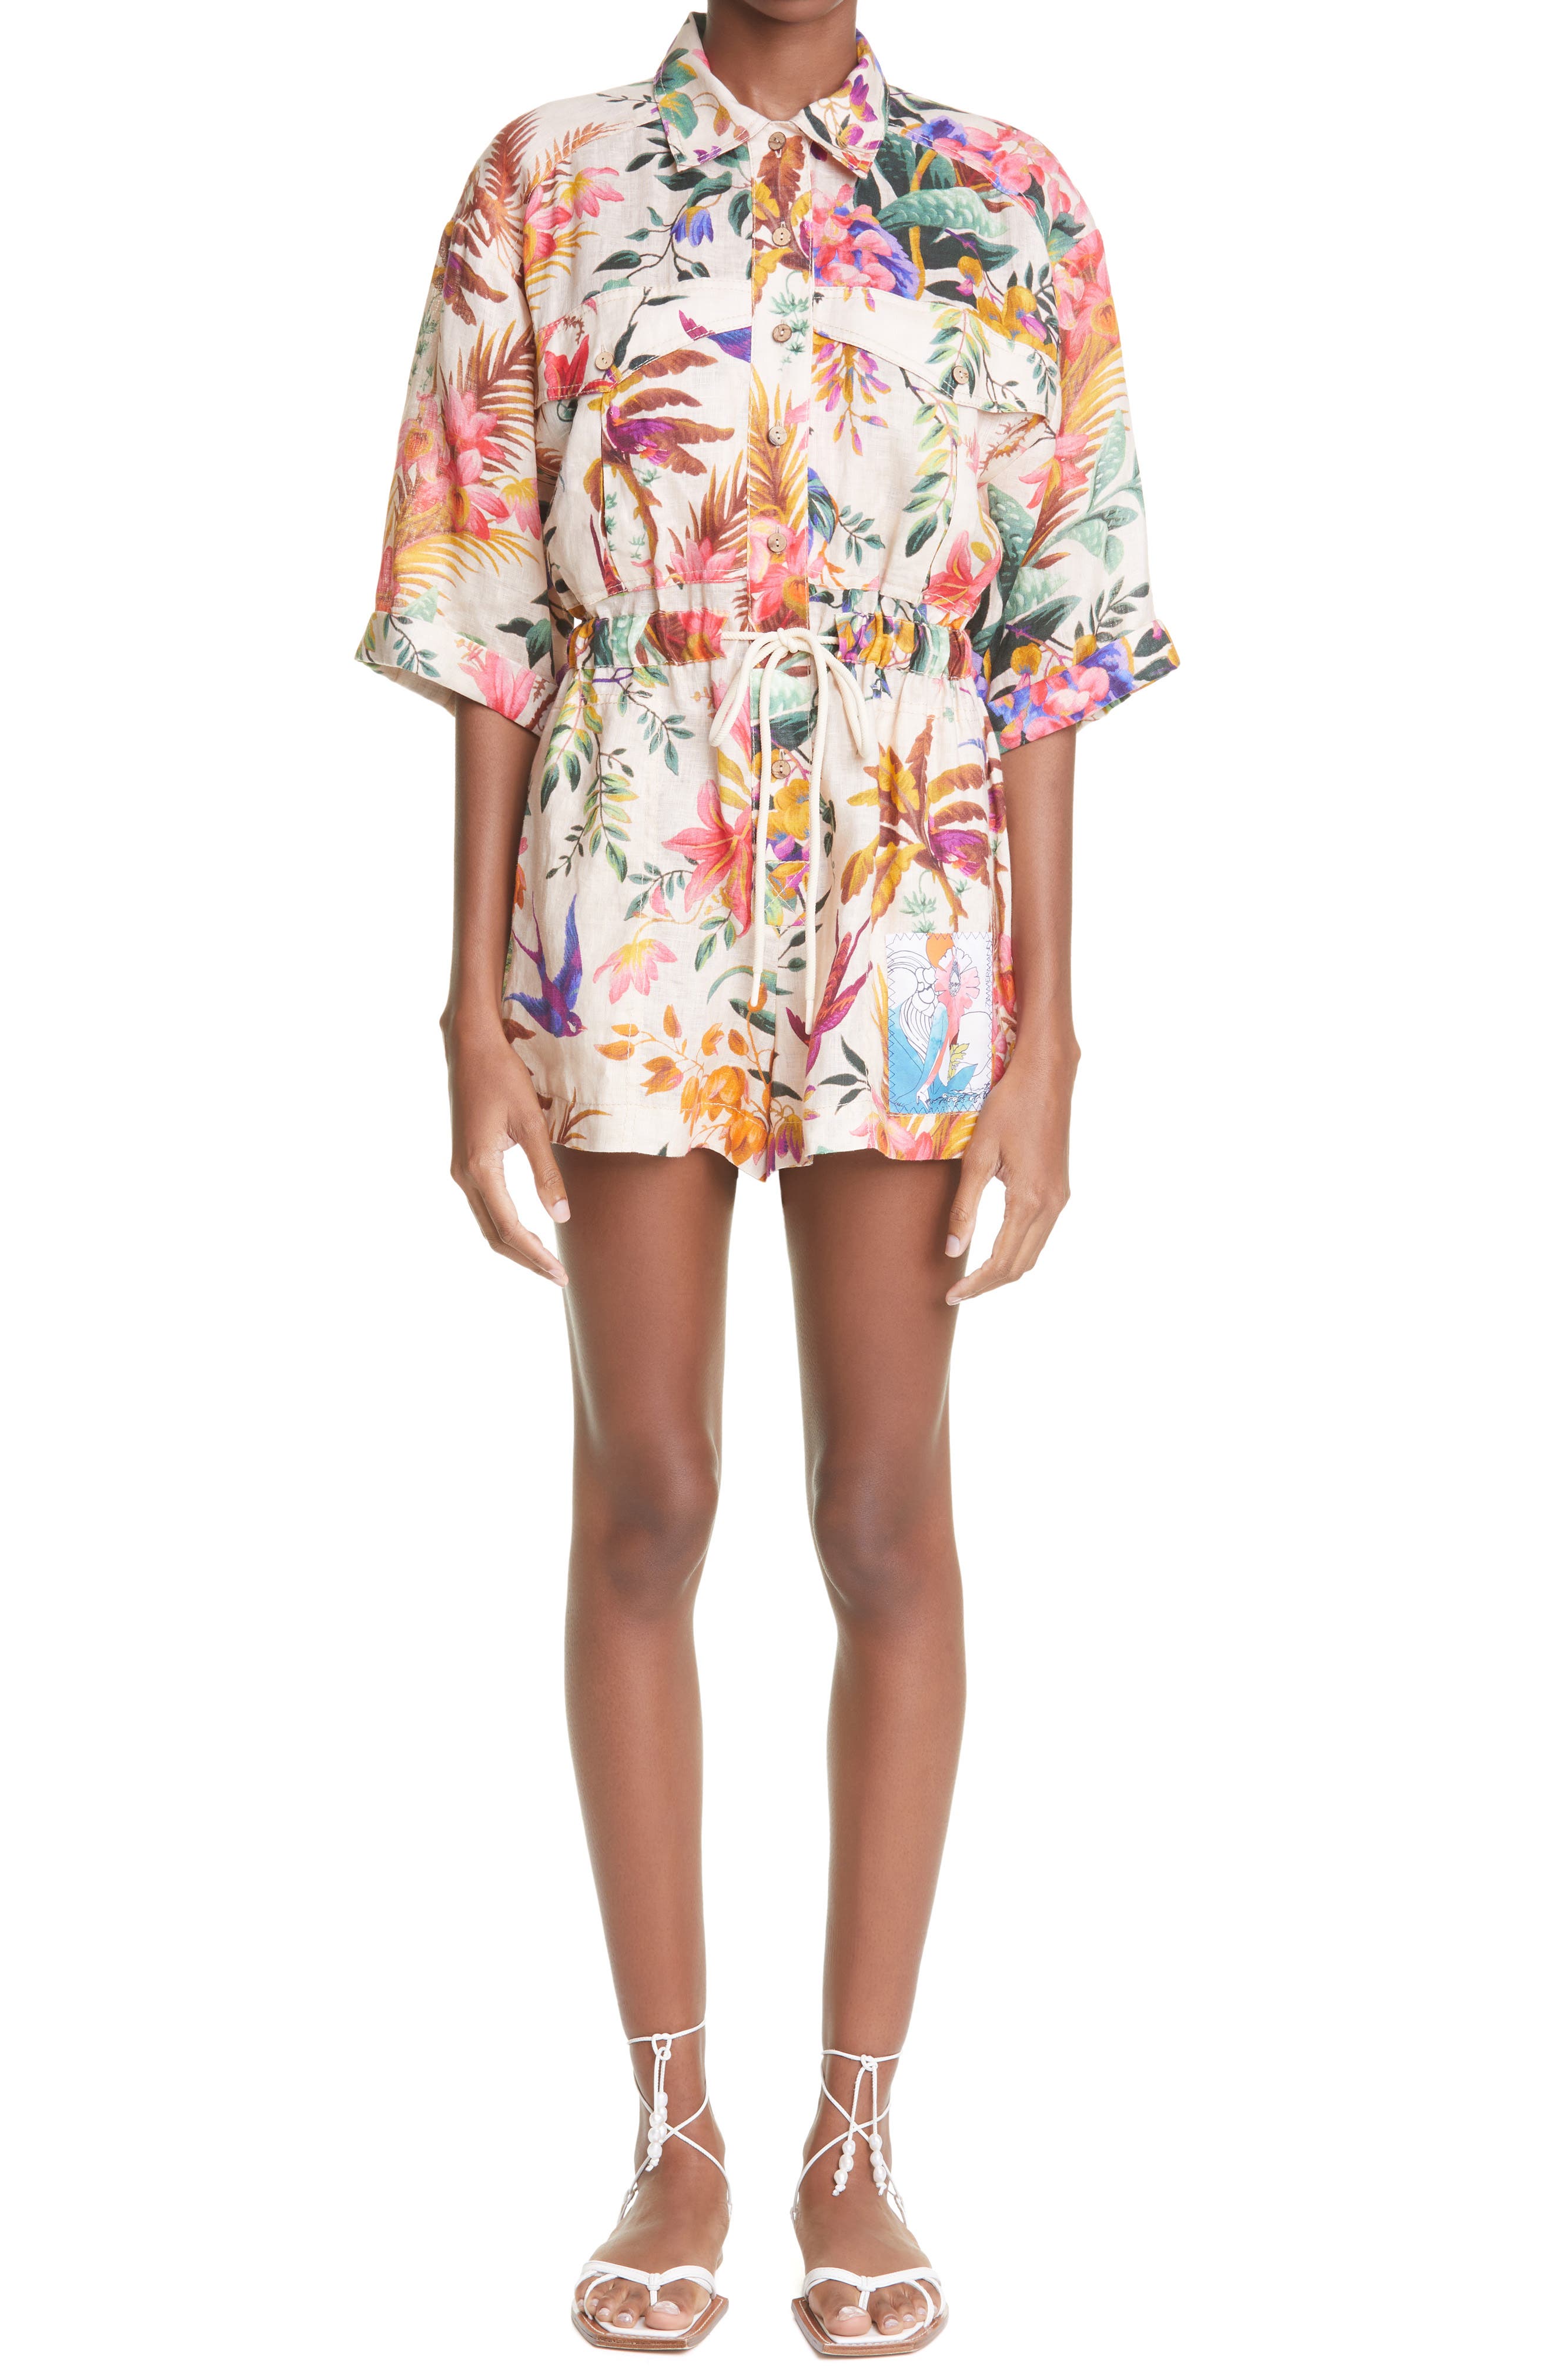 Zimmermann Tropicana Floral Print Linen Utility Romper in Cream Floral at Nordstrom, Size 2